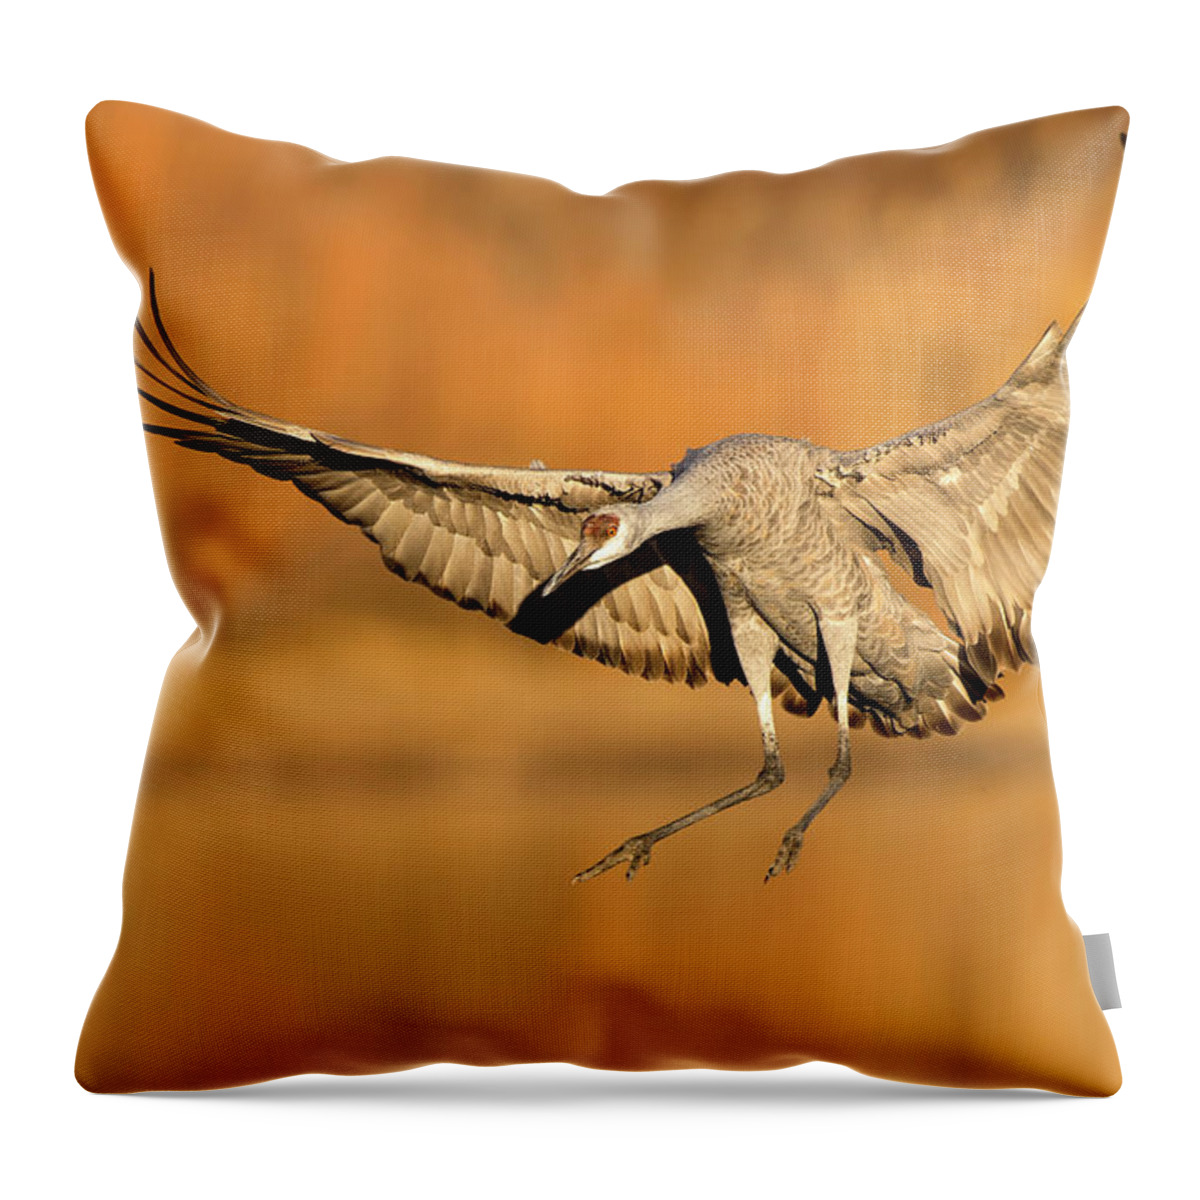 Animal Themes Throw Pillow featuring the photograph Sandhill Crane Landing by D Williams Photography